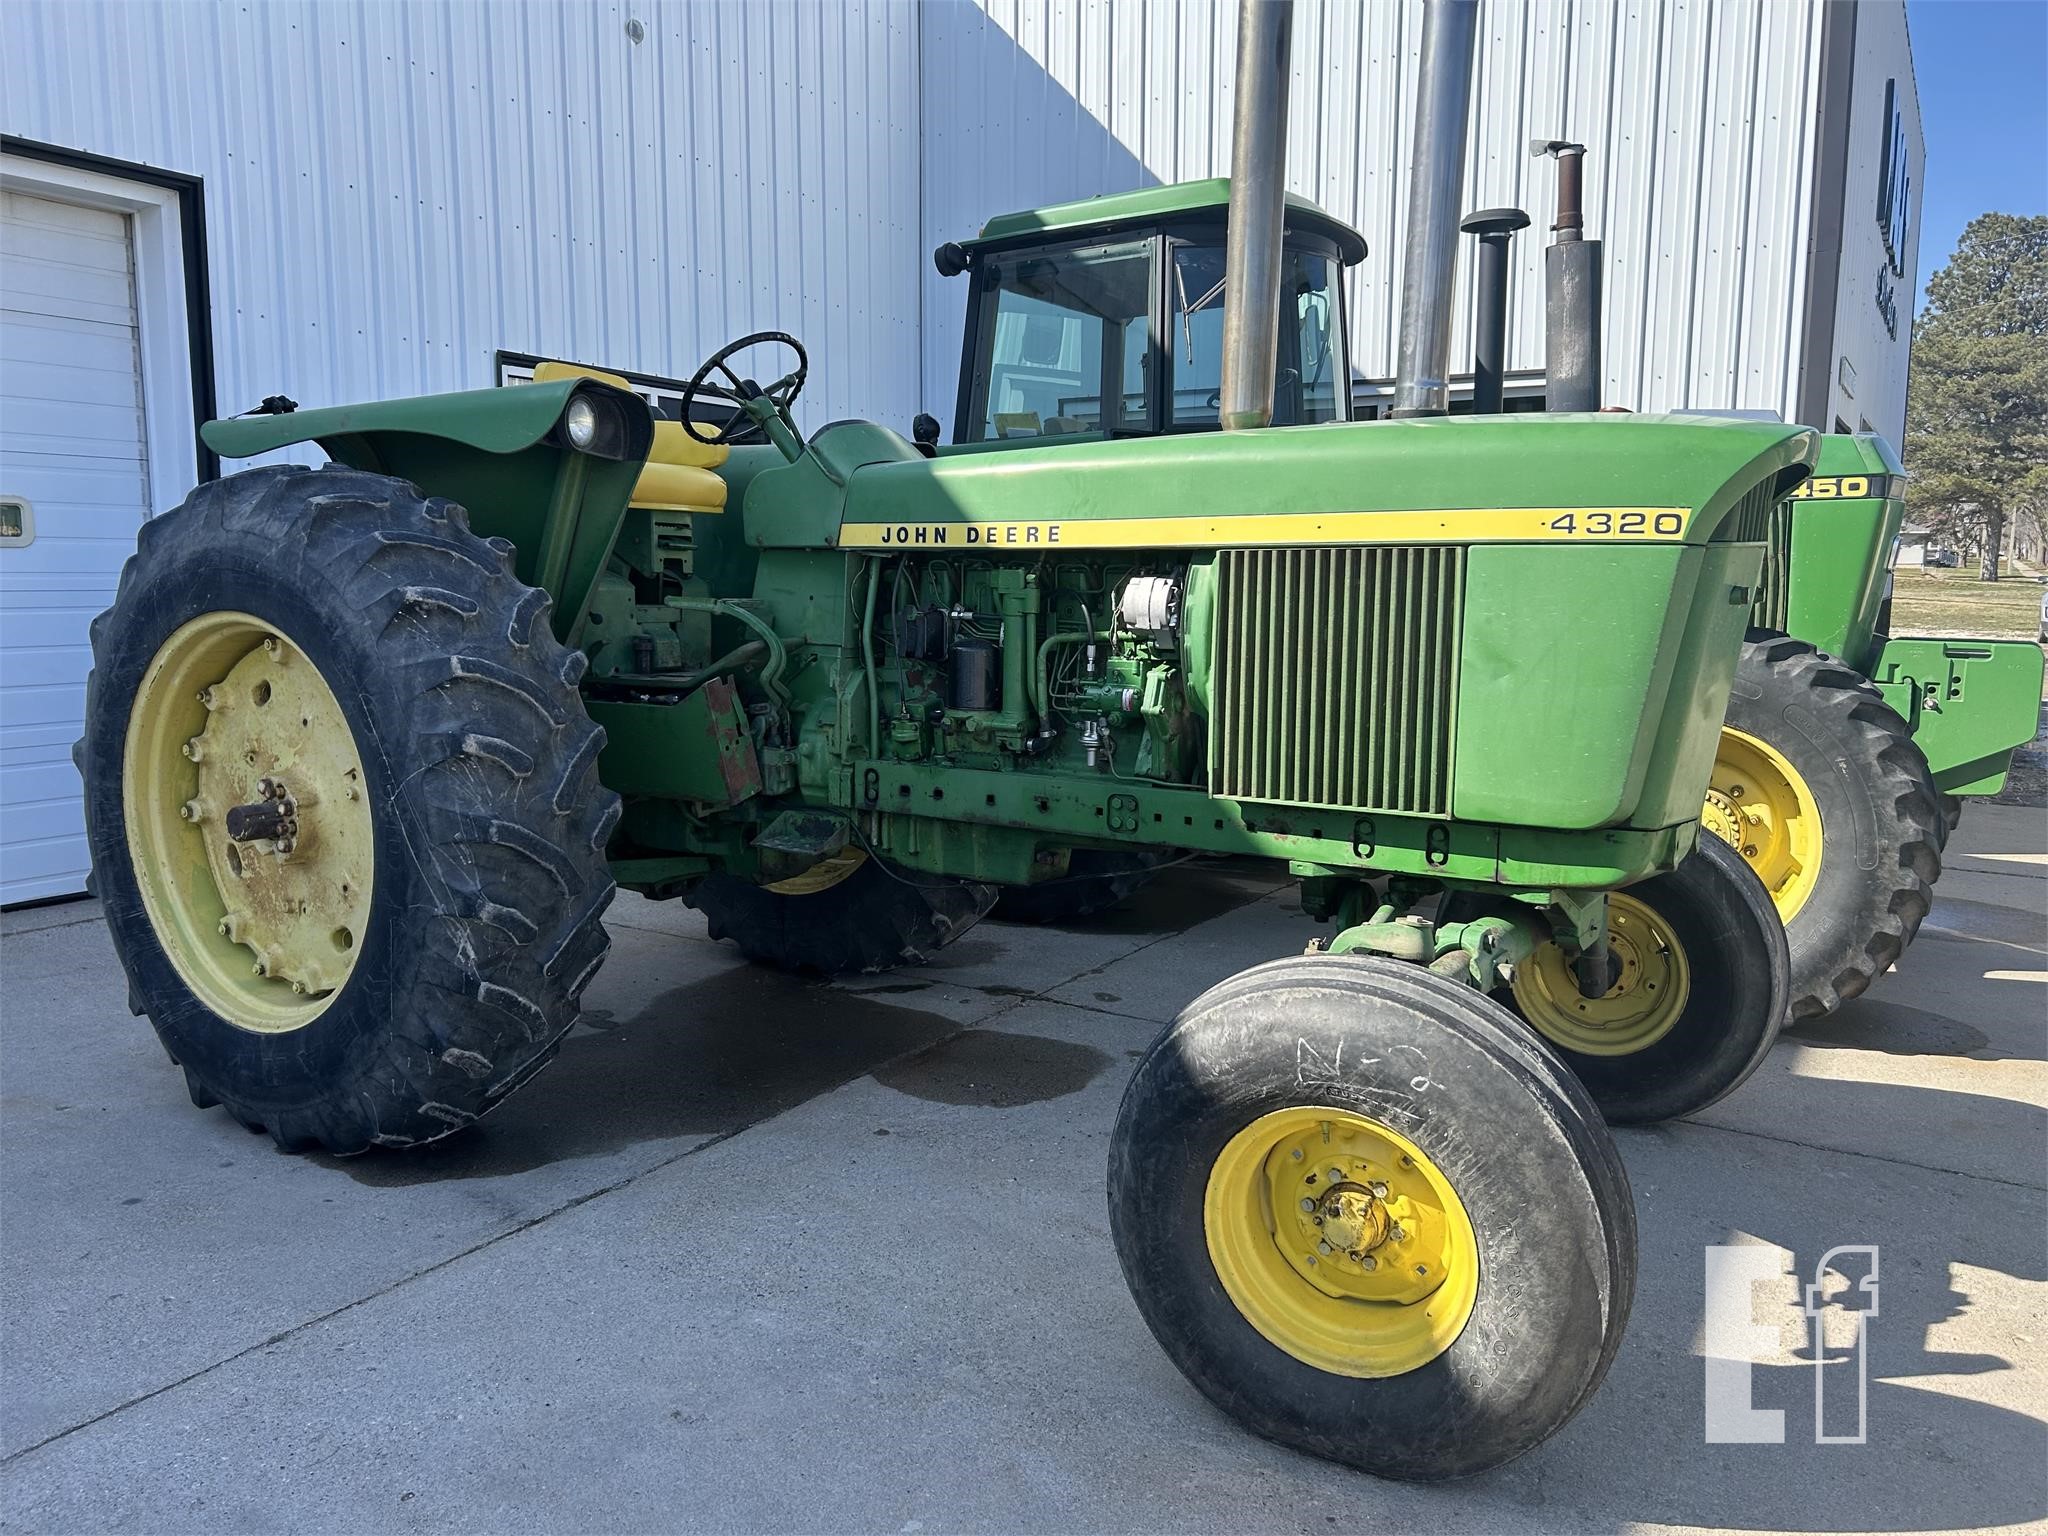 JOHN DEERE Other Online Auctions - 402 Listings